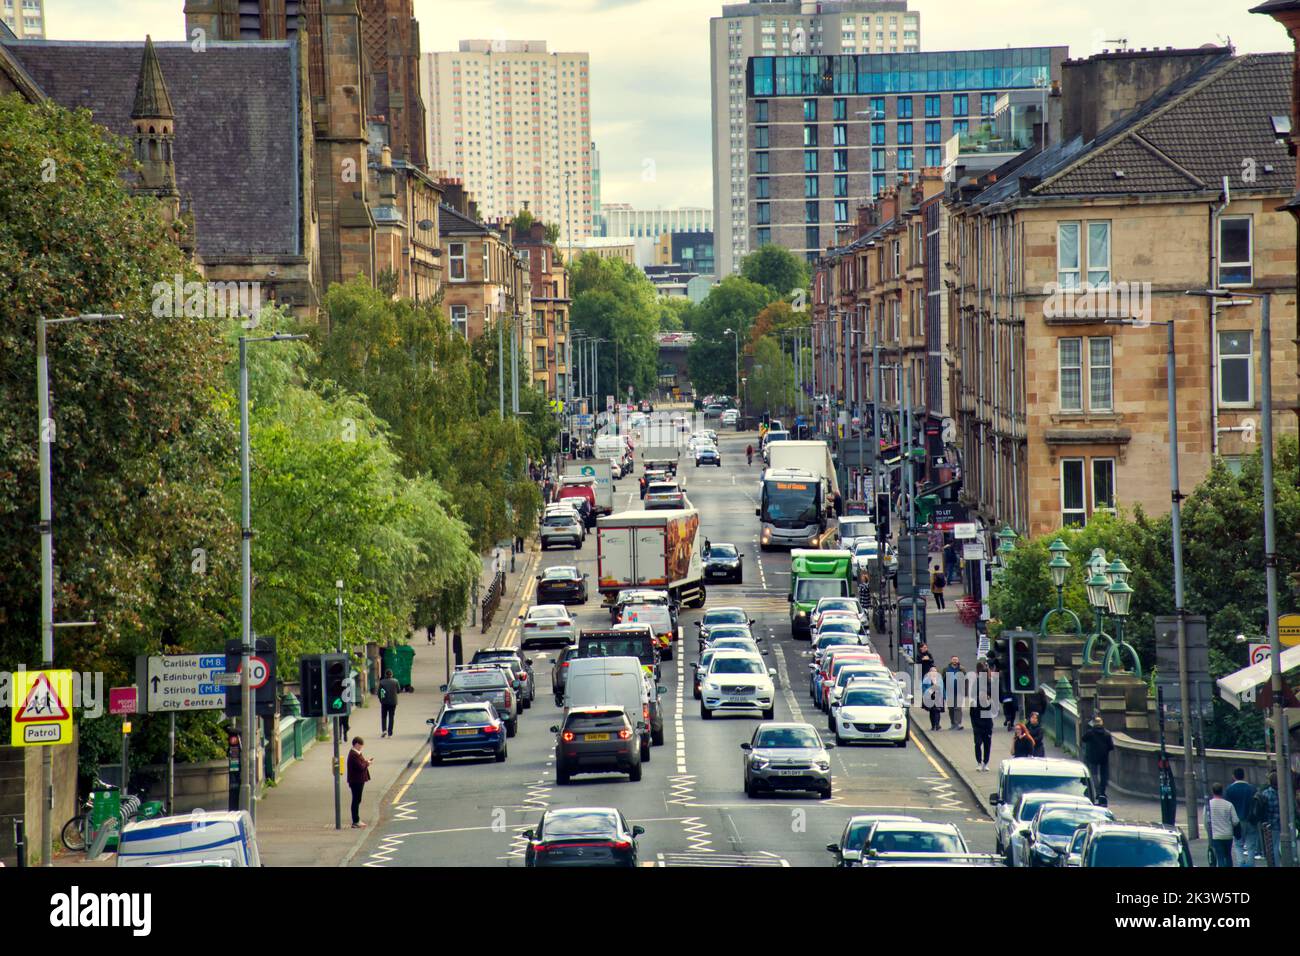 great western road looking to town one of the coolest areas according to time out Glasgow, Scotland, UK Stock Photo